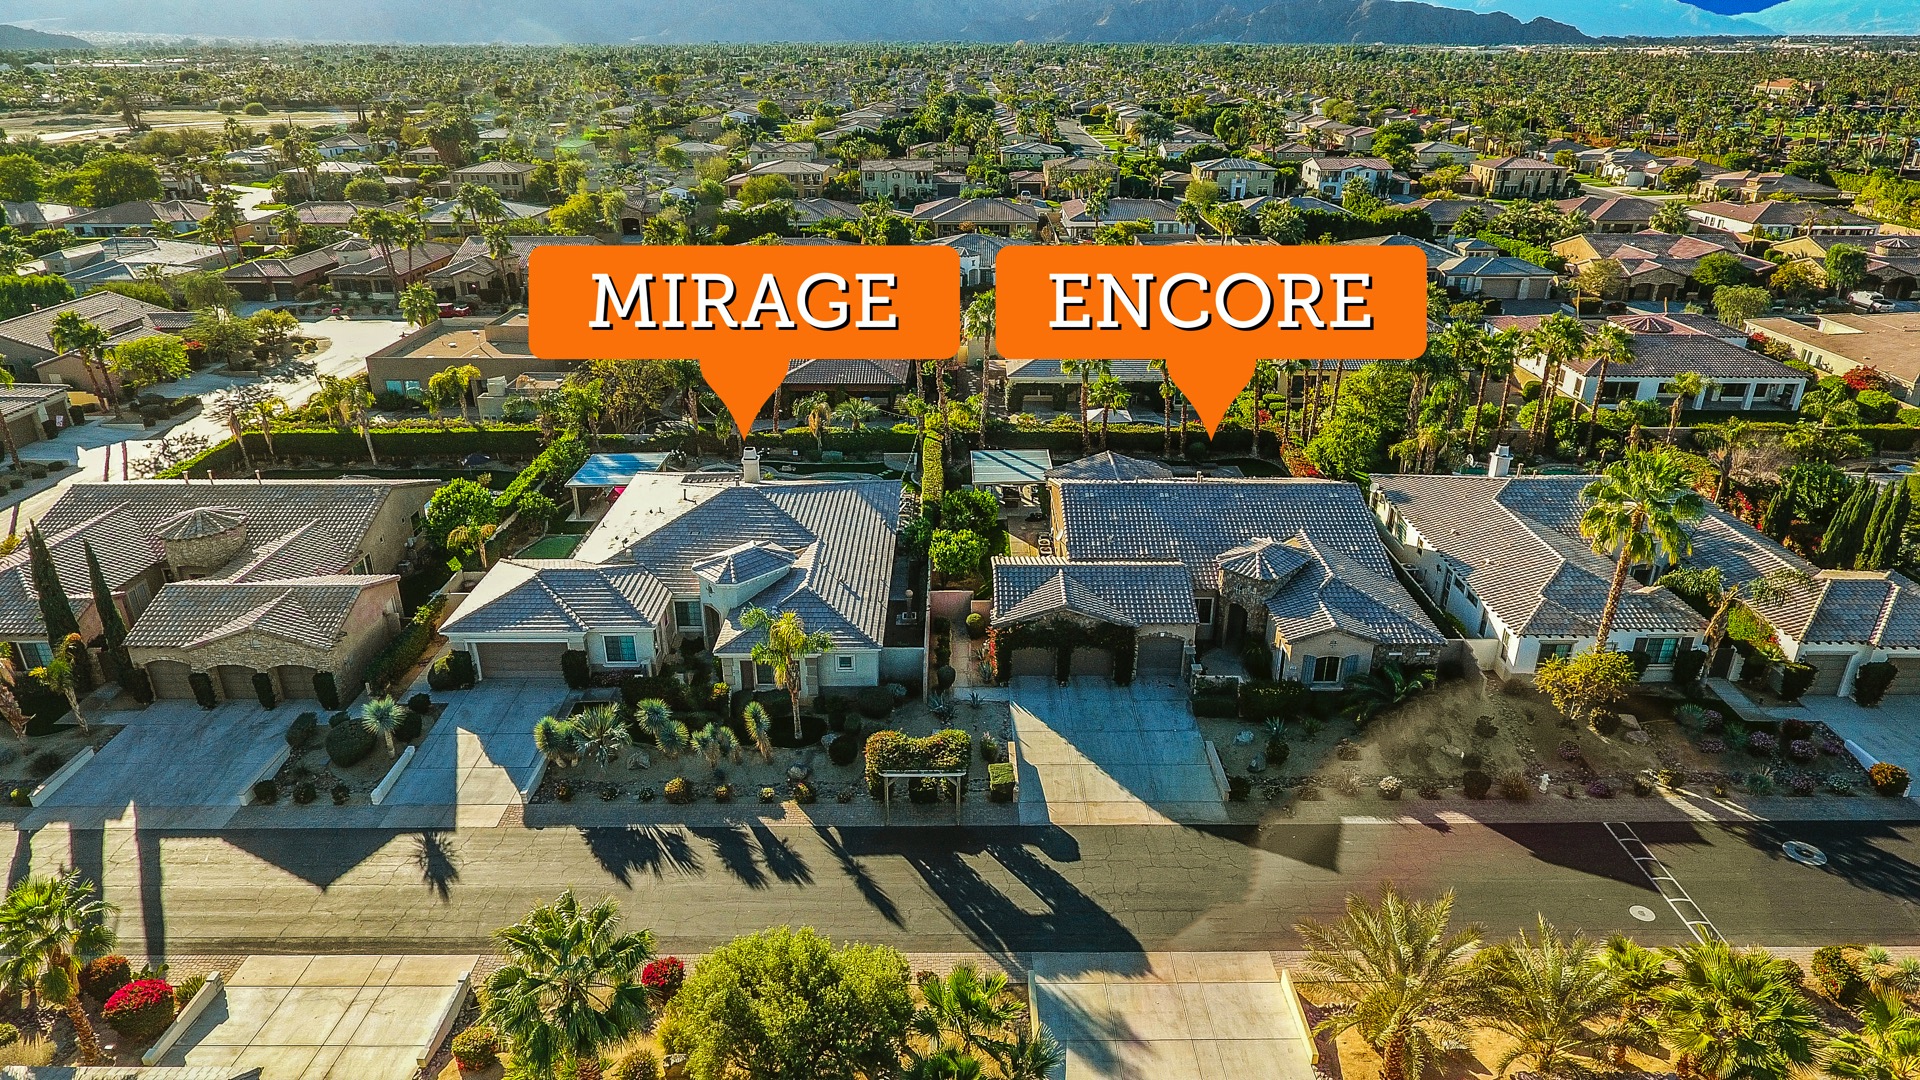 Have a larger group? Book Mirage and Encore to accommodate your whole family!